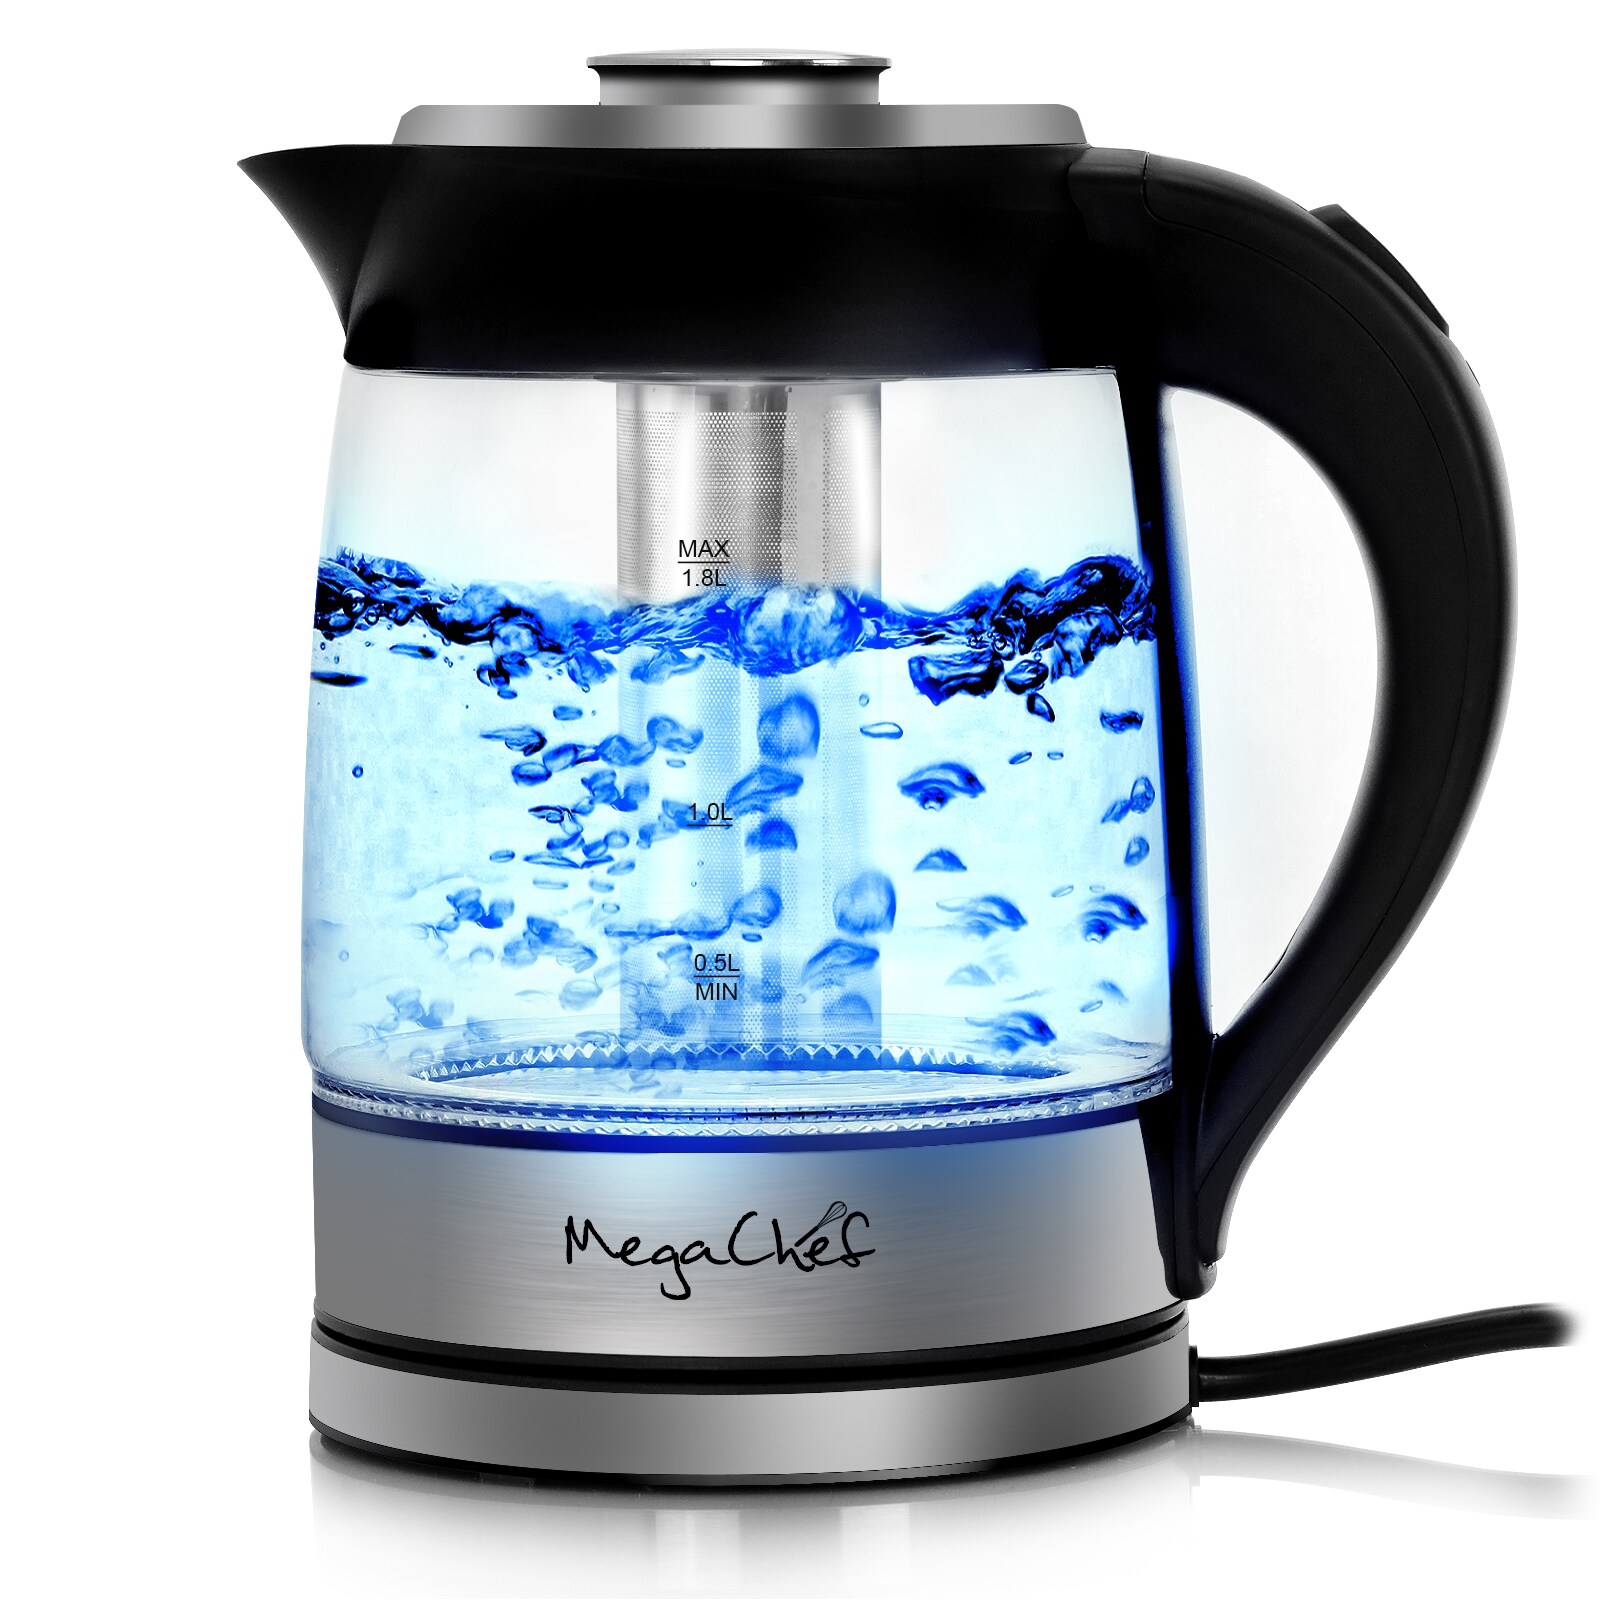 4.2 Cup Stainless Steel Cordless Electric Kettle in Teal - On Sale